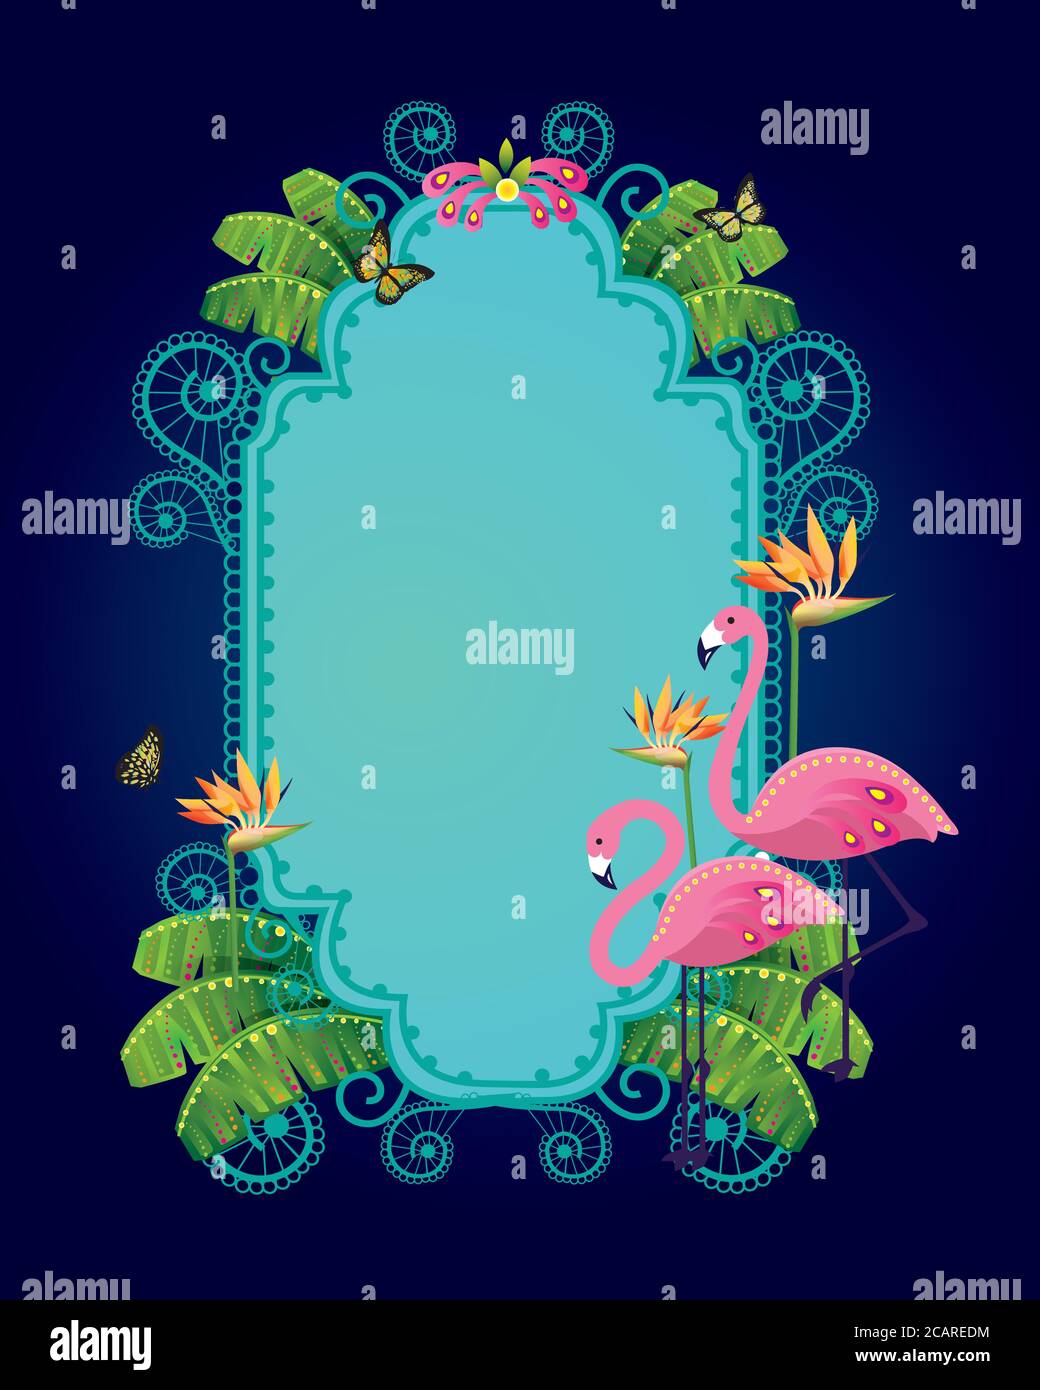 Intrigue frame with flamingo birds and tropical plant drawing, with bird of paradise flower and butterflies flying around. Stock Vector